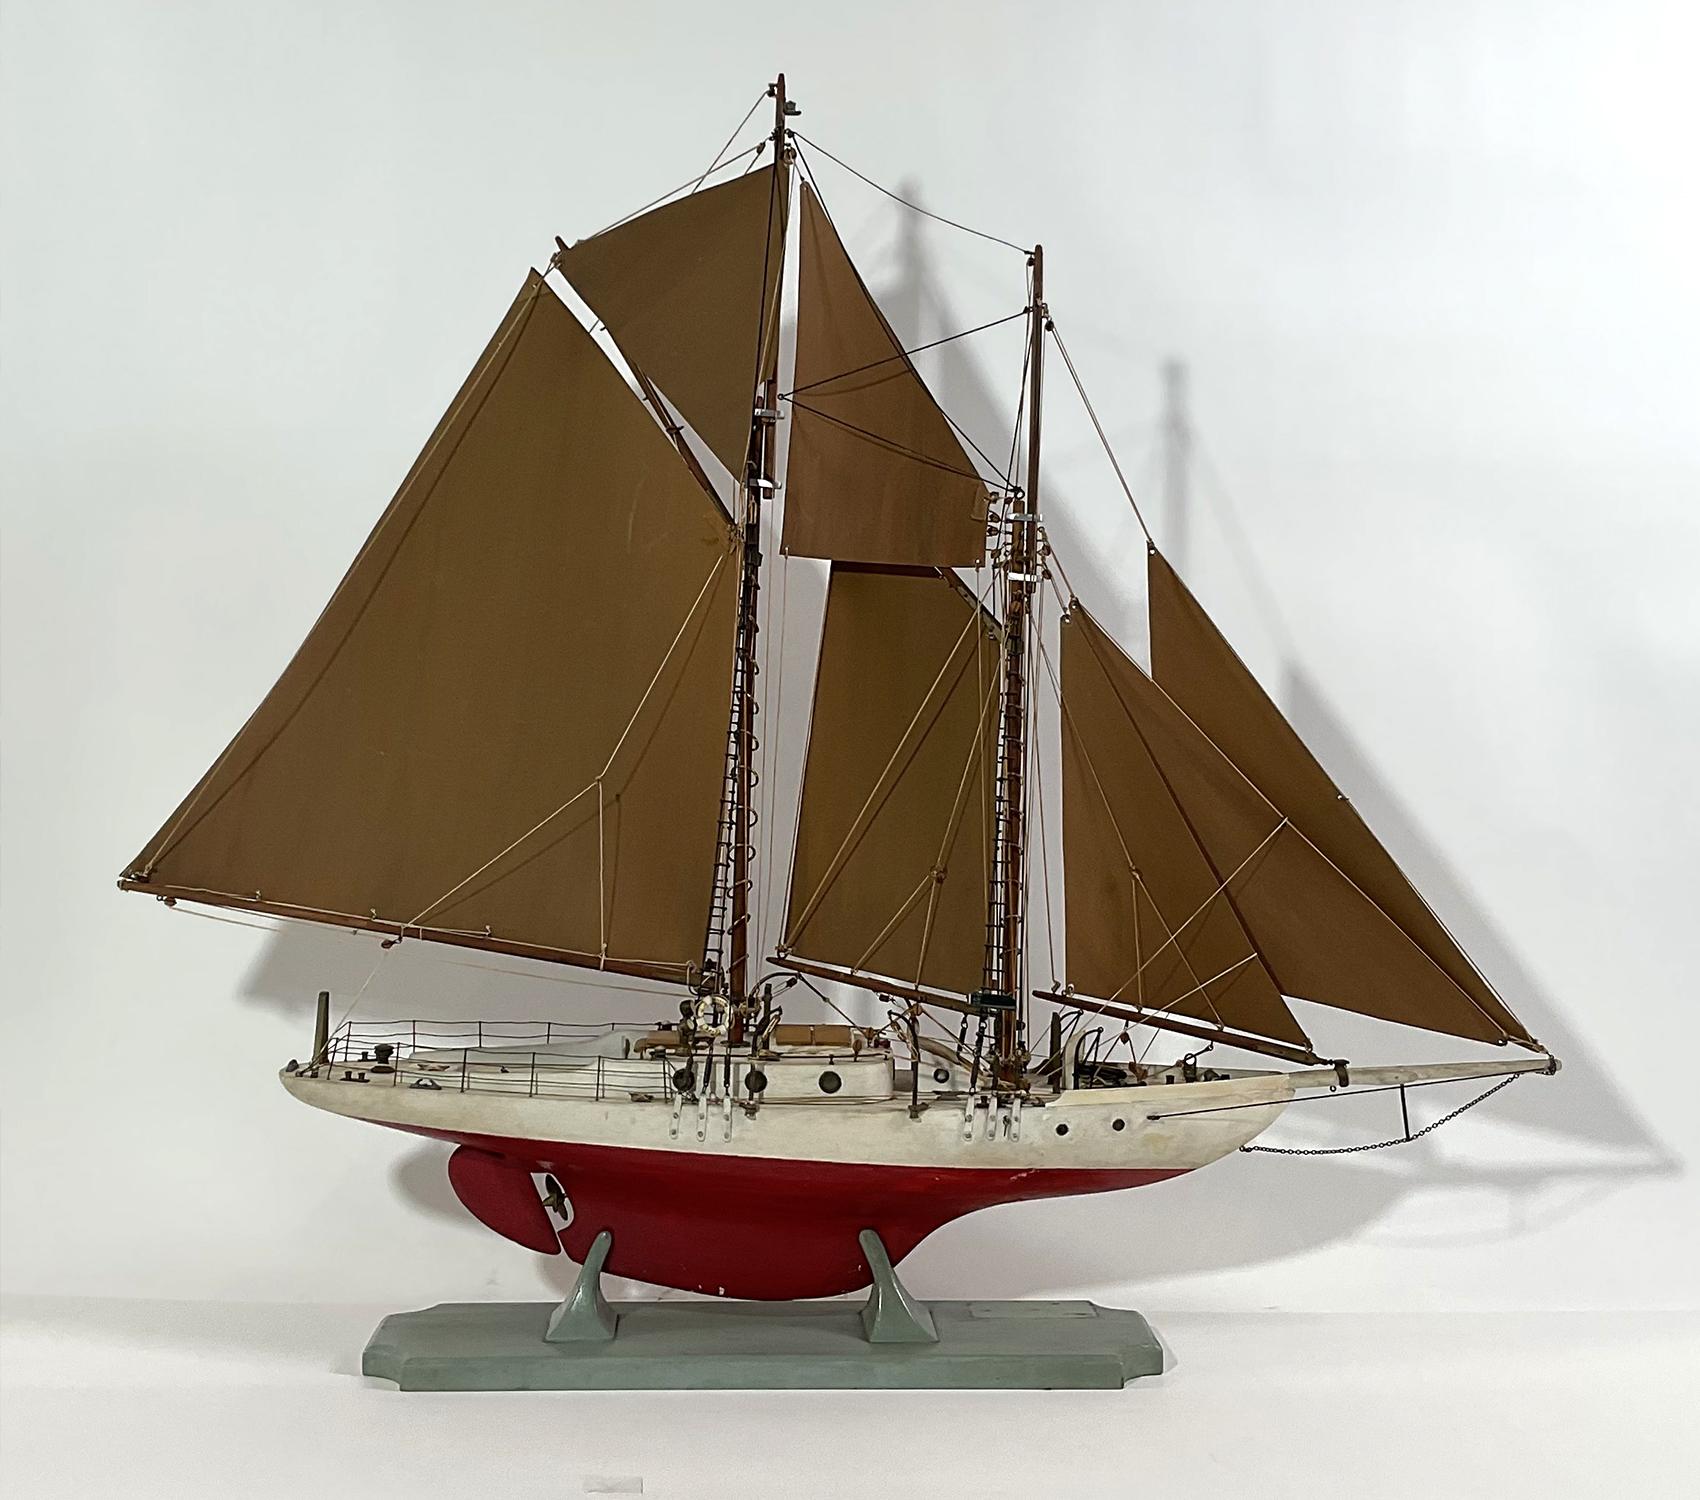 Charming mid-twentieth century model of a two masted schooner. With a suit of fiber board type of sails. Deck details include life rings, pin rails, skylight, companionway, cleats, anchor, portholes, cockpit, helm, etc. Mounted to its original wood